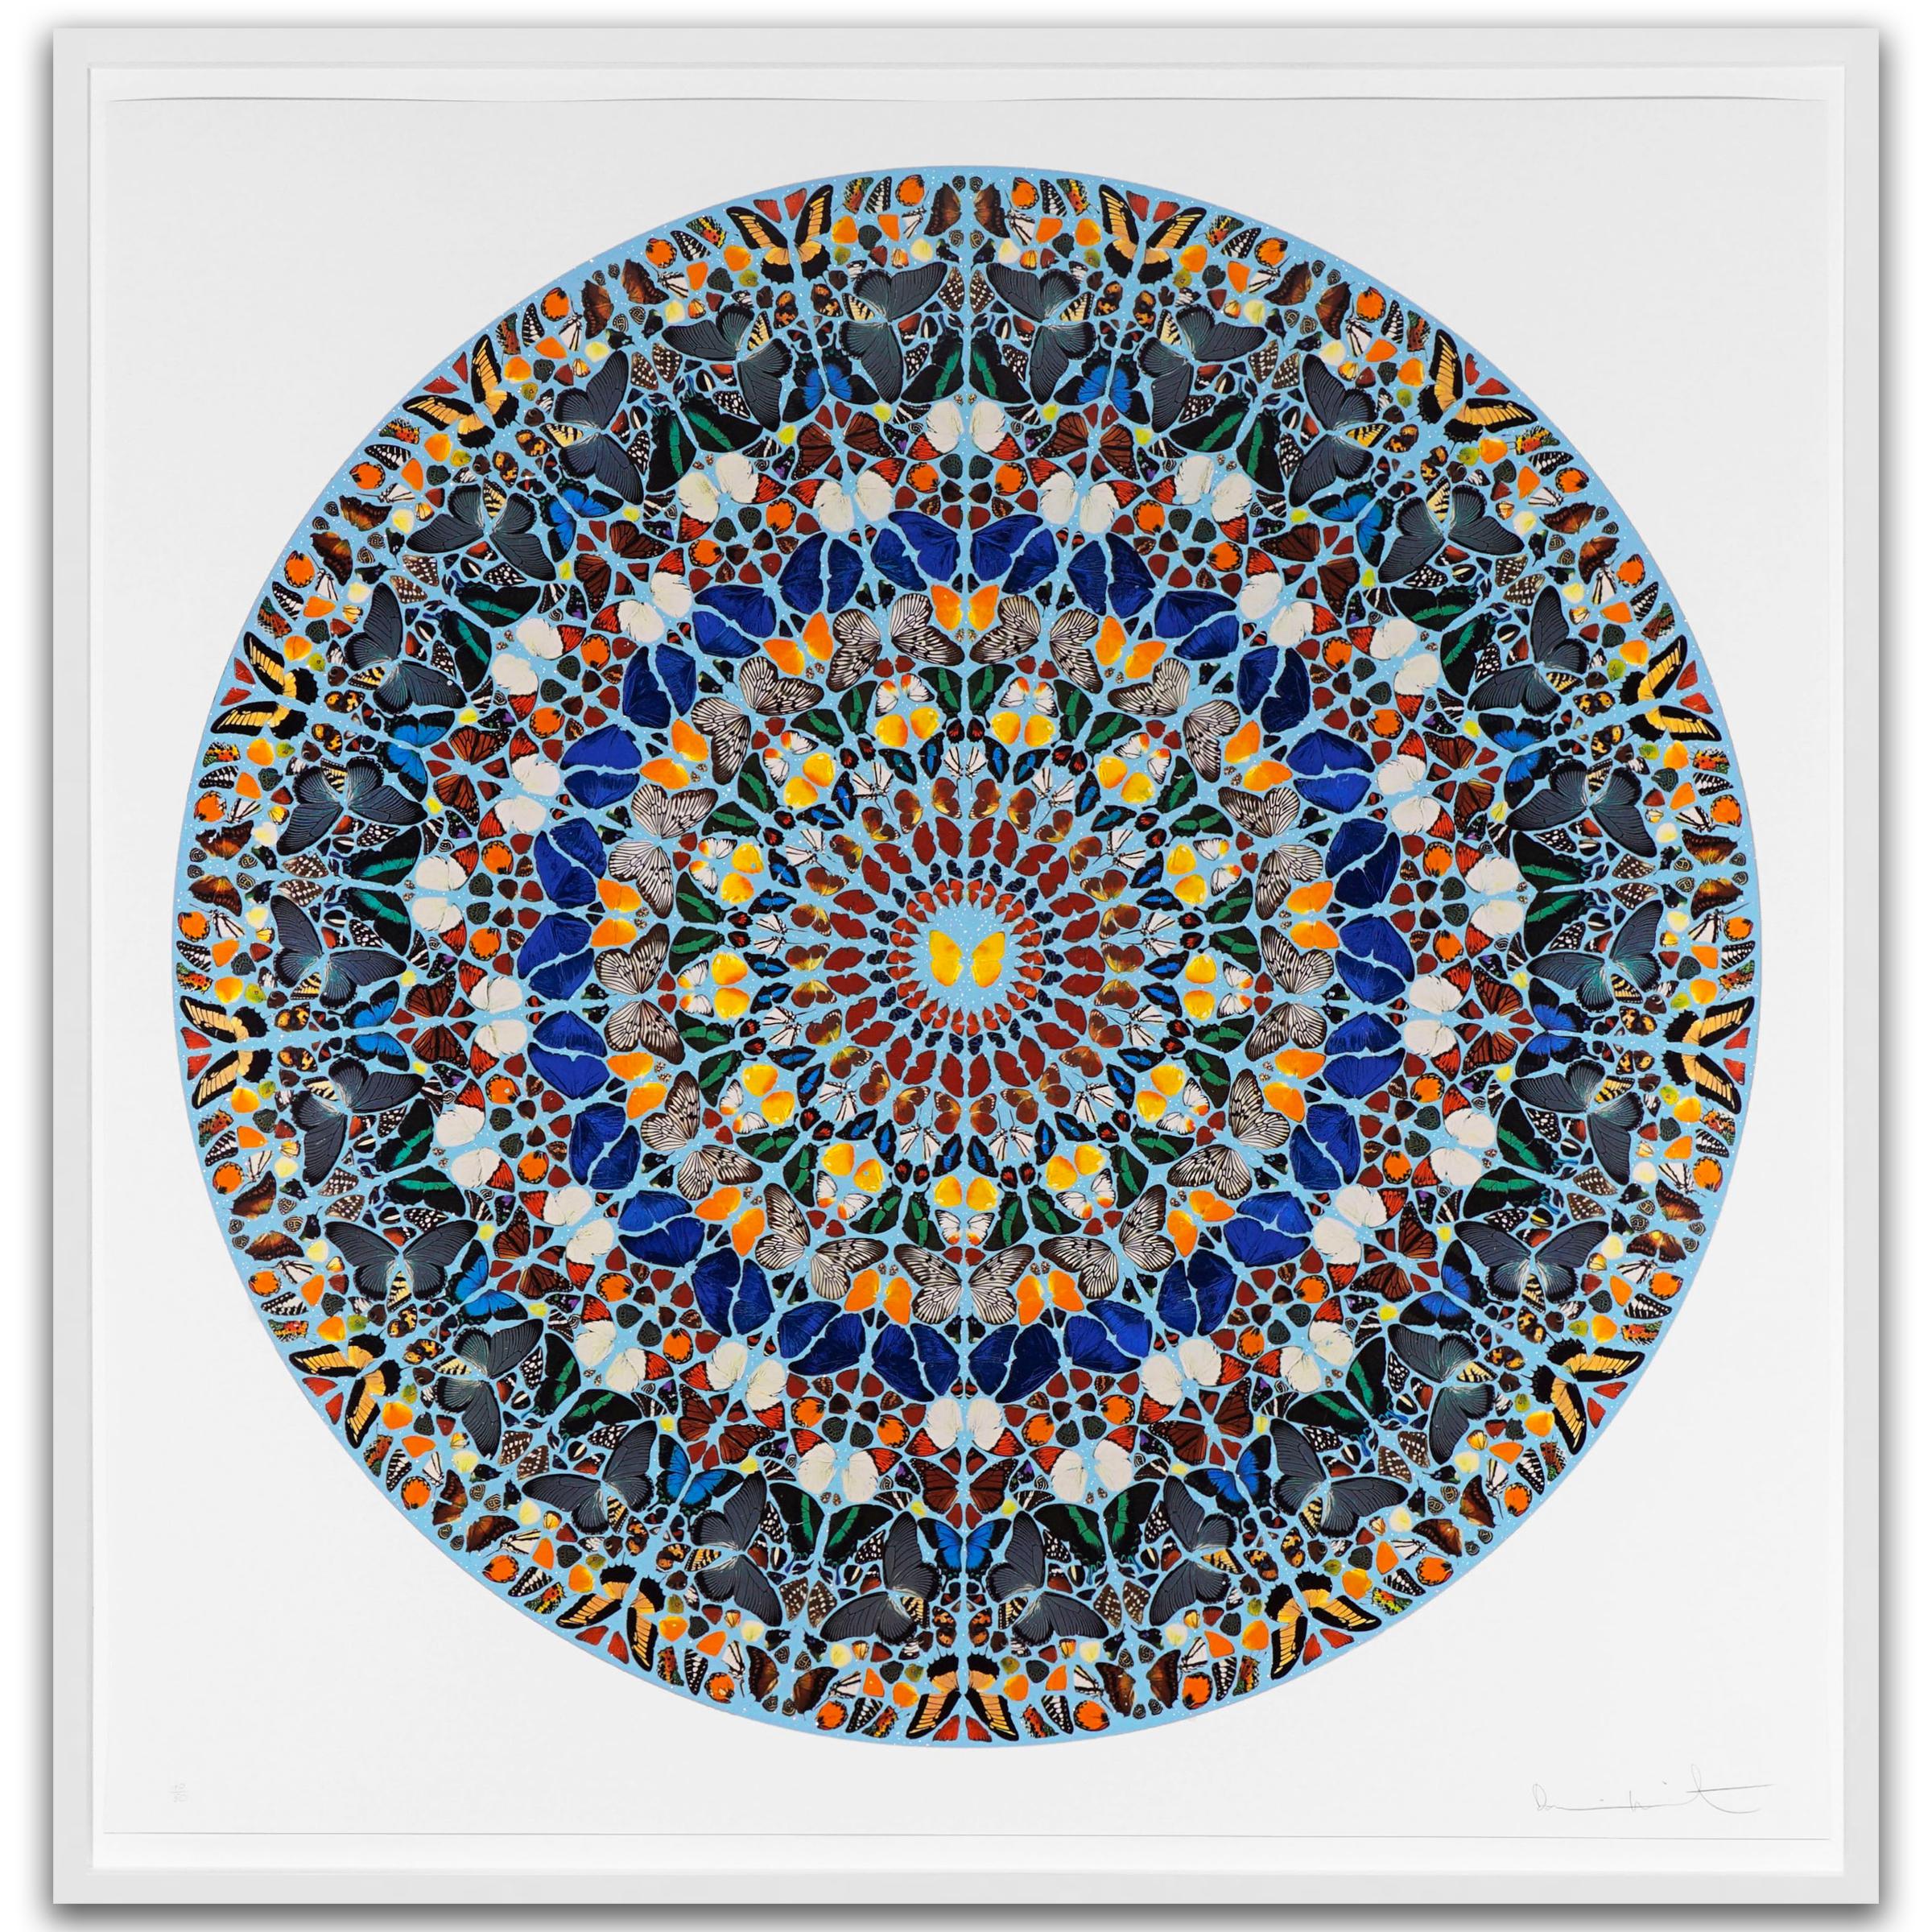 The grand ‘Mantra' butterfly wing kaleidoscope mandala with diamond dust by contemporary master artist, Damien Hirst, was created in 2011. The large-scale glittering artwork is a silkscreen print with layers of genuine diamond dust and is the